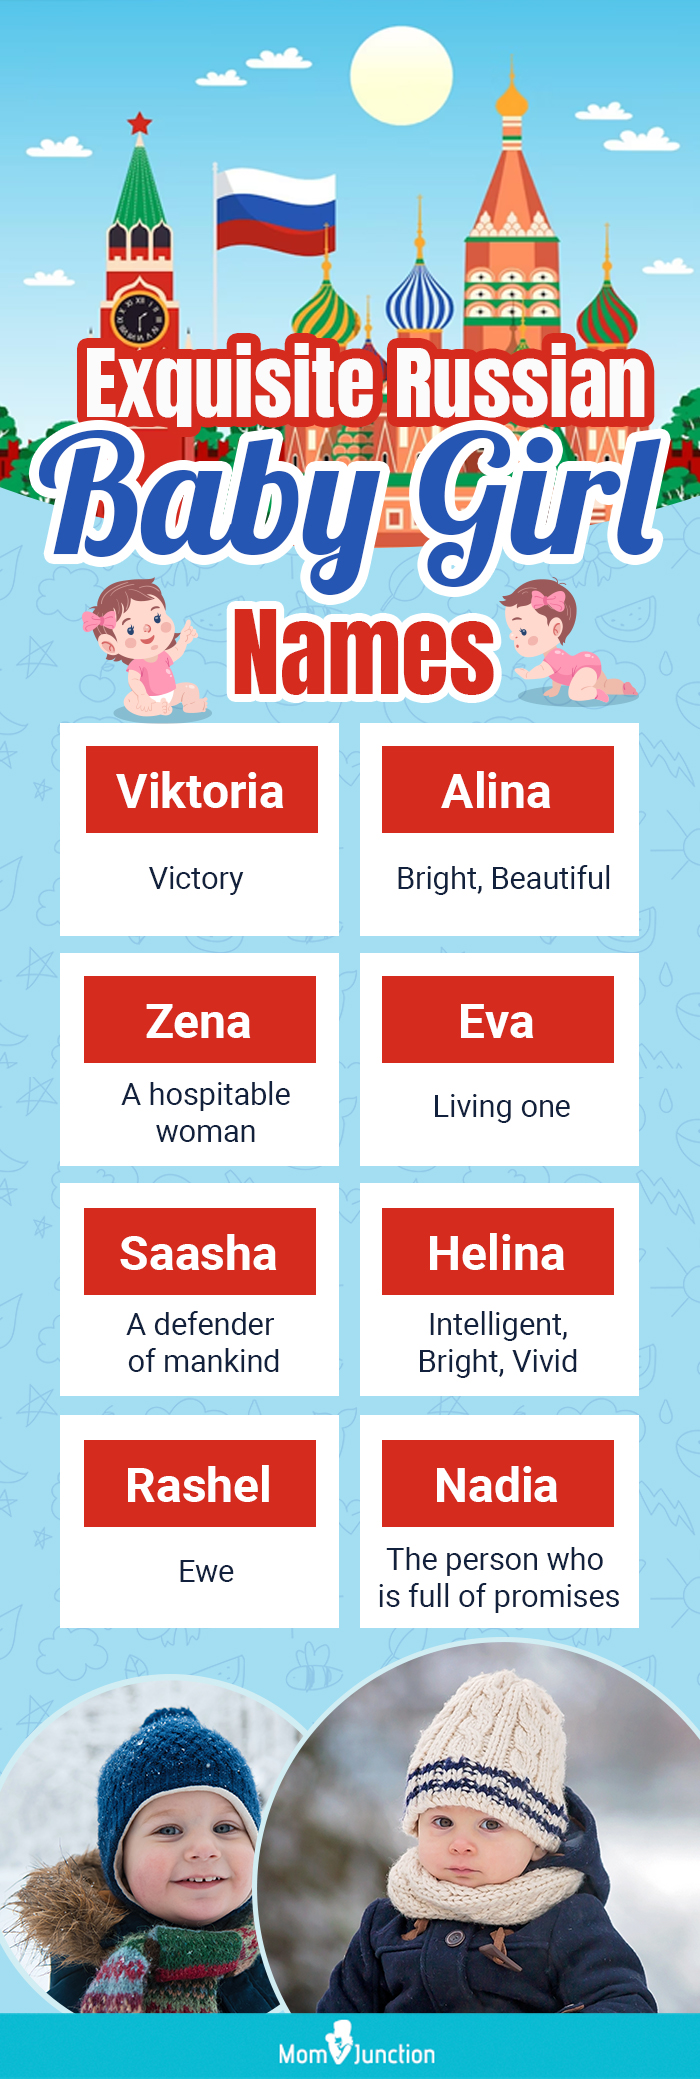 exquisite russian baby girl names (infographic)